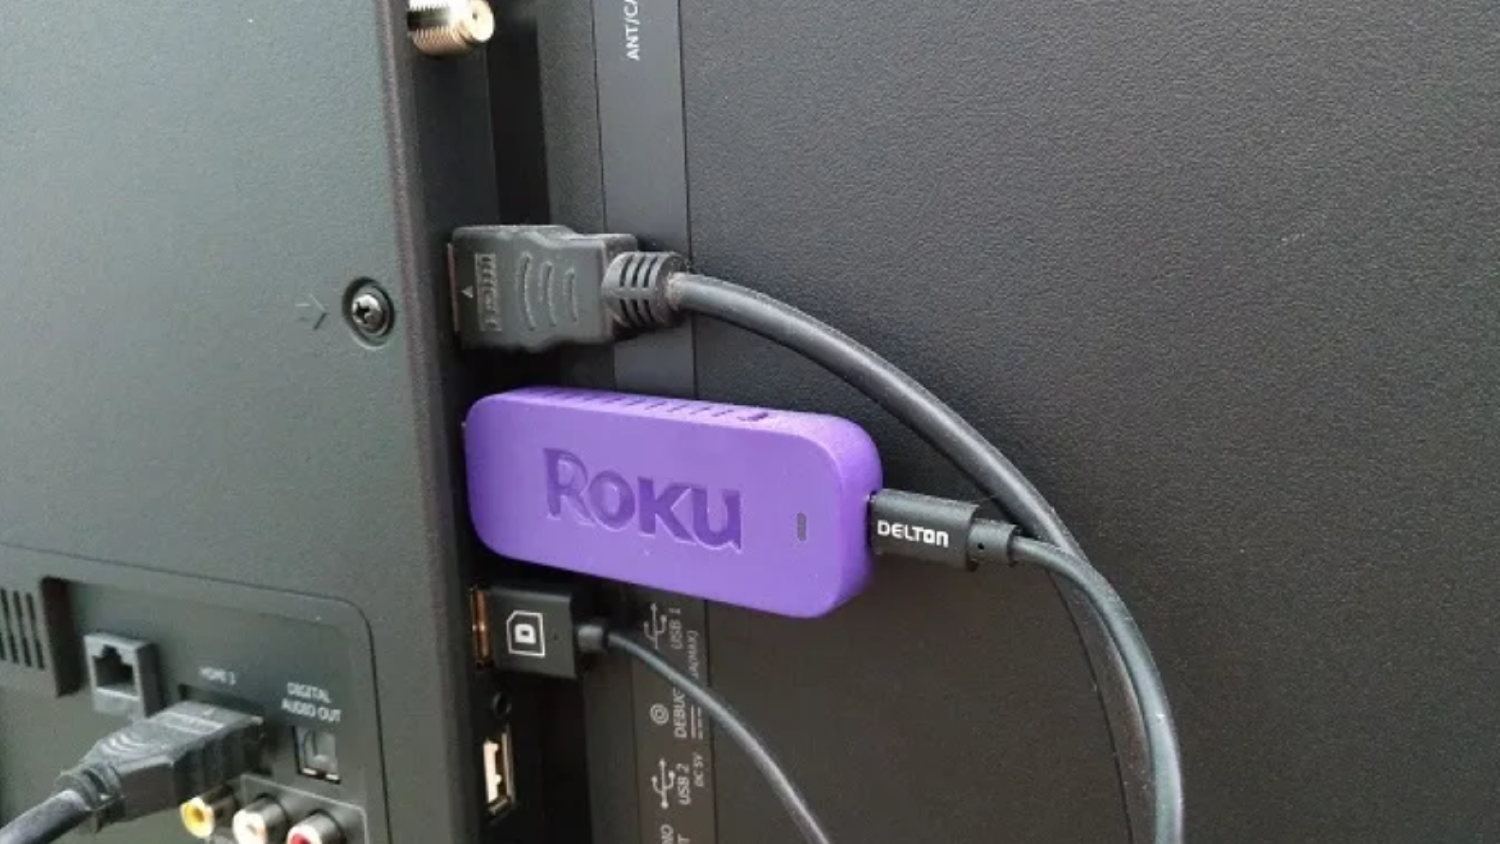 your computer and roku tv should be connected using an hdmi cable.